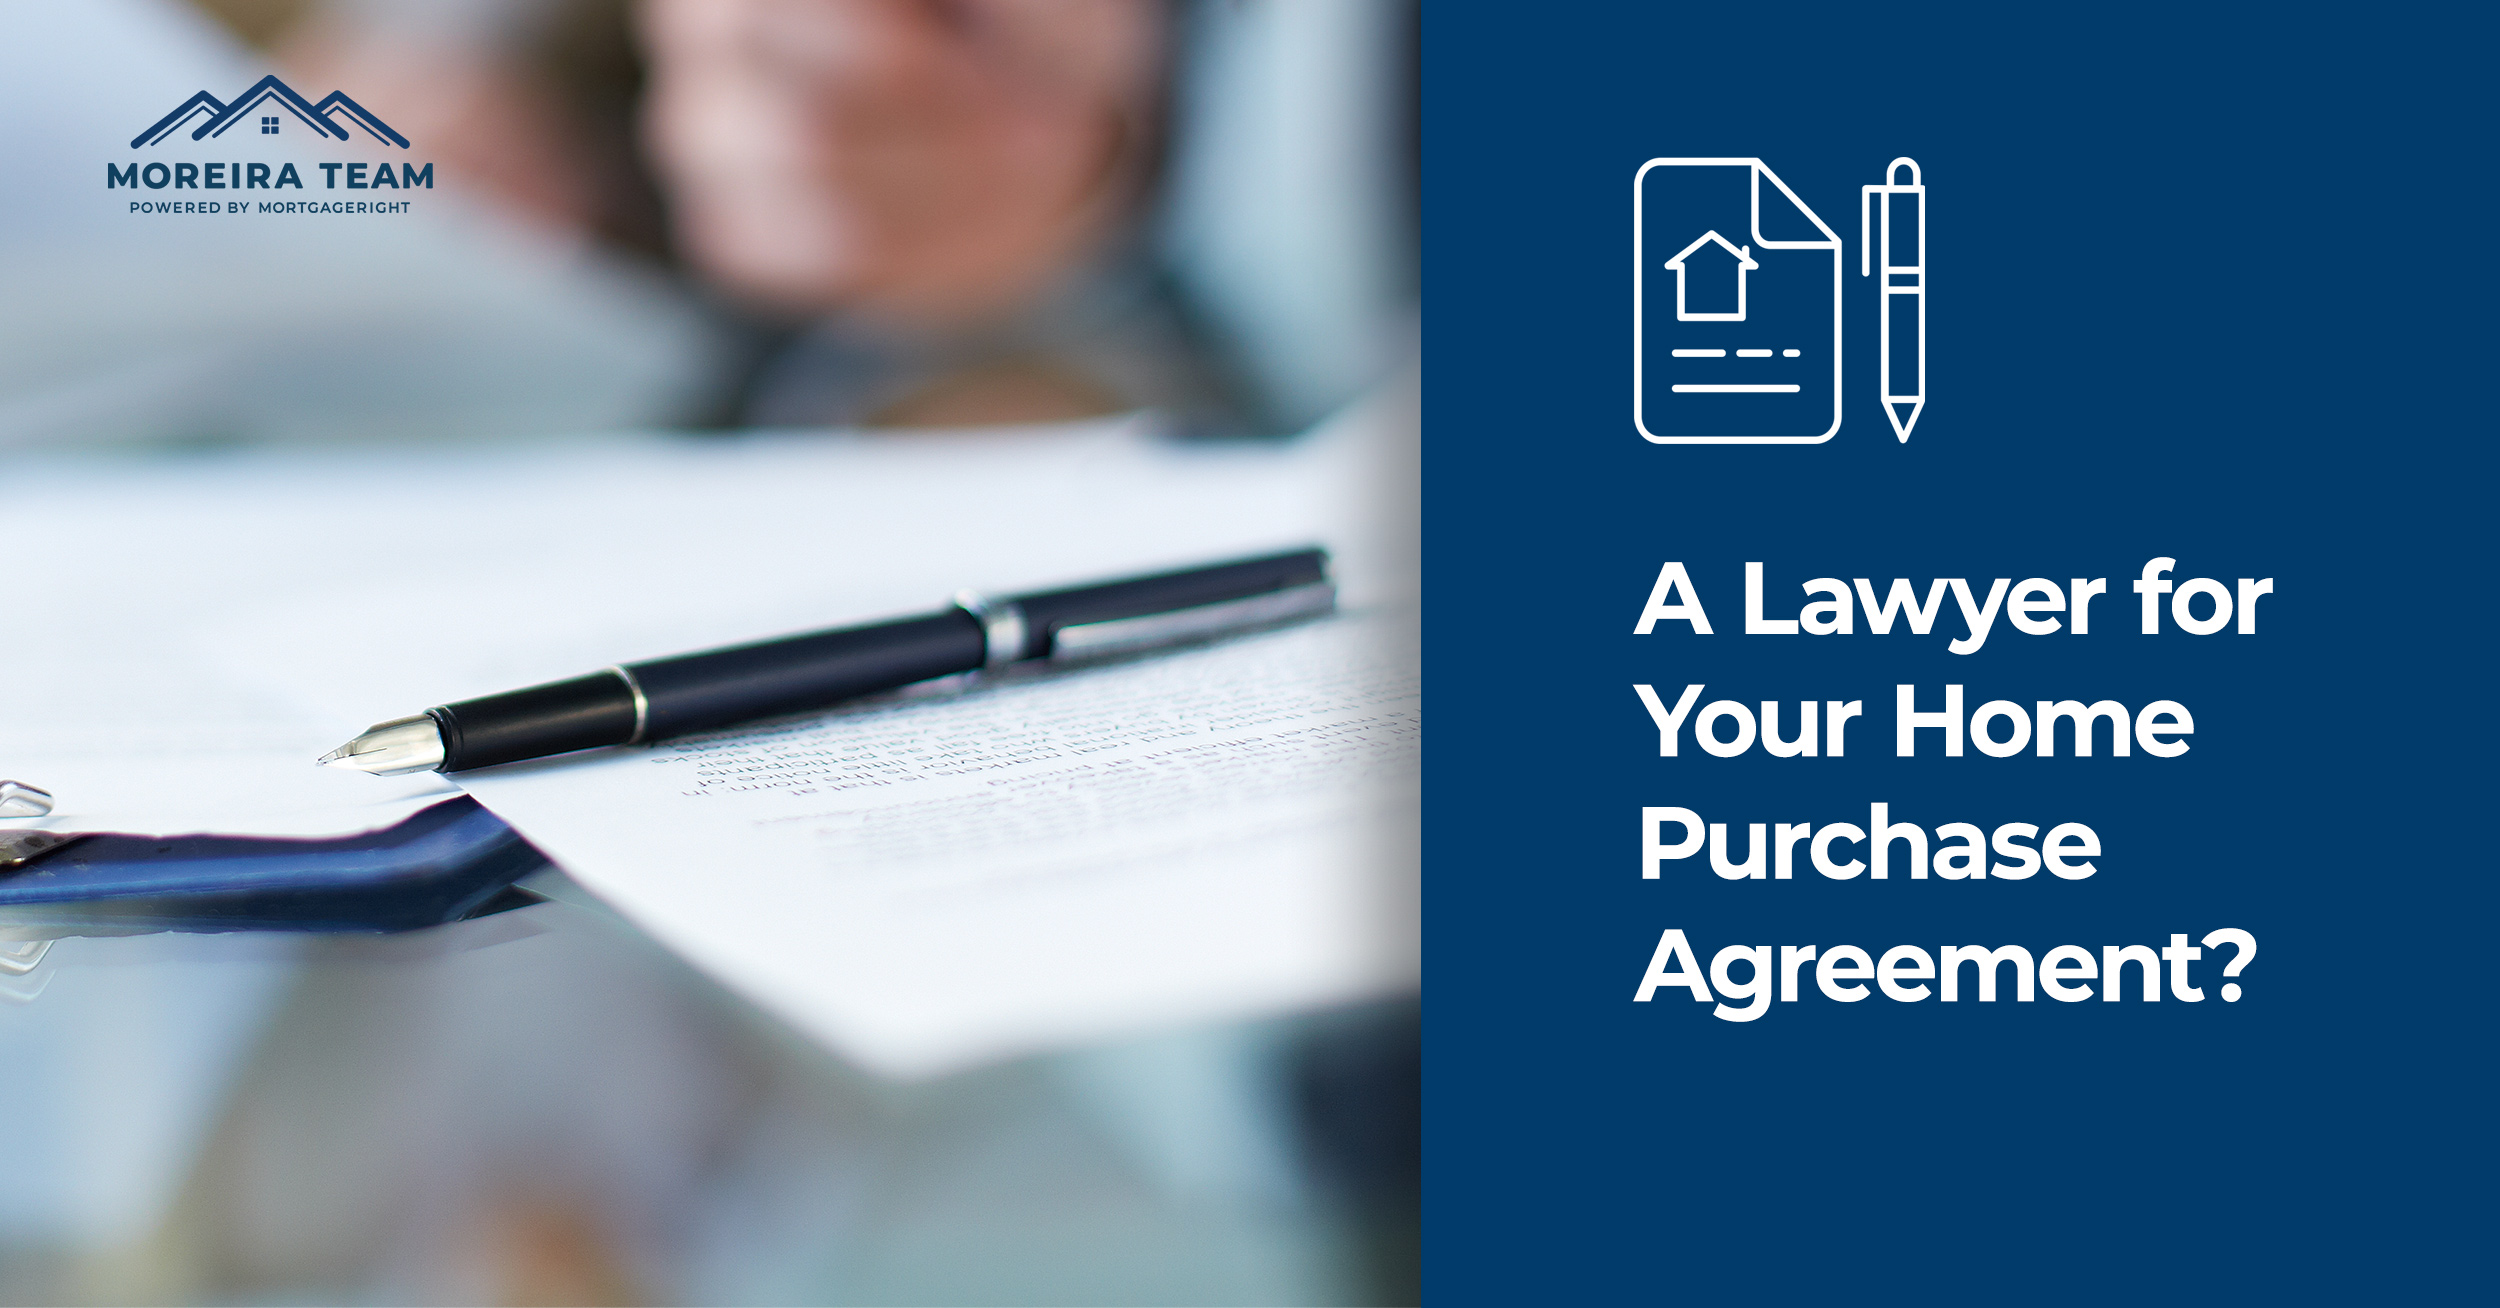 Home Purchase Agreement – Considering an Attorney